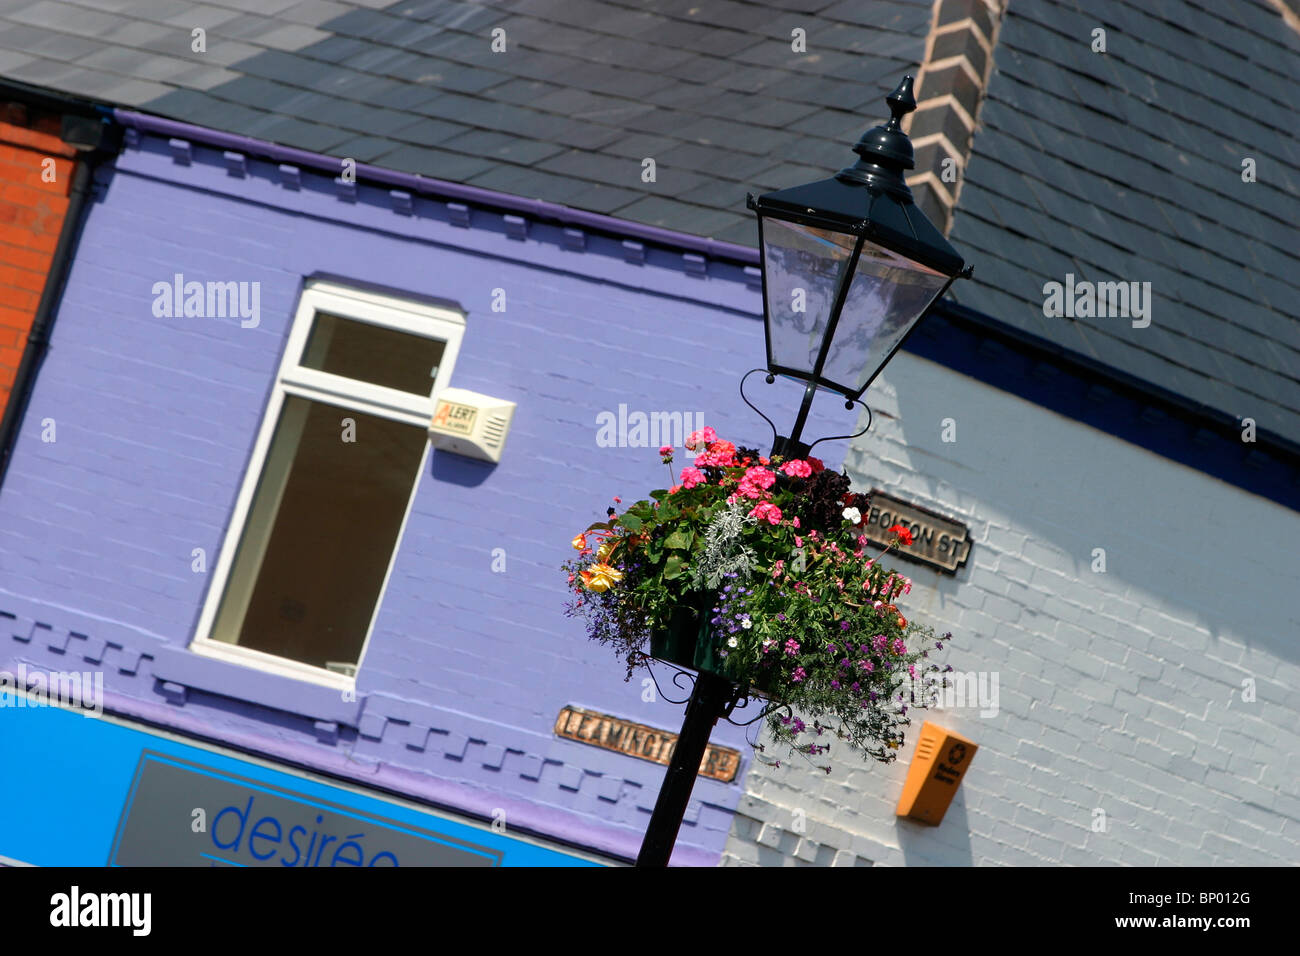 England, Cheshire, Stockport, Reddish, Houldsworth Square, hanging basket and colourfully painted buildings Stock Photo